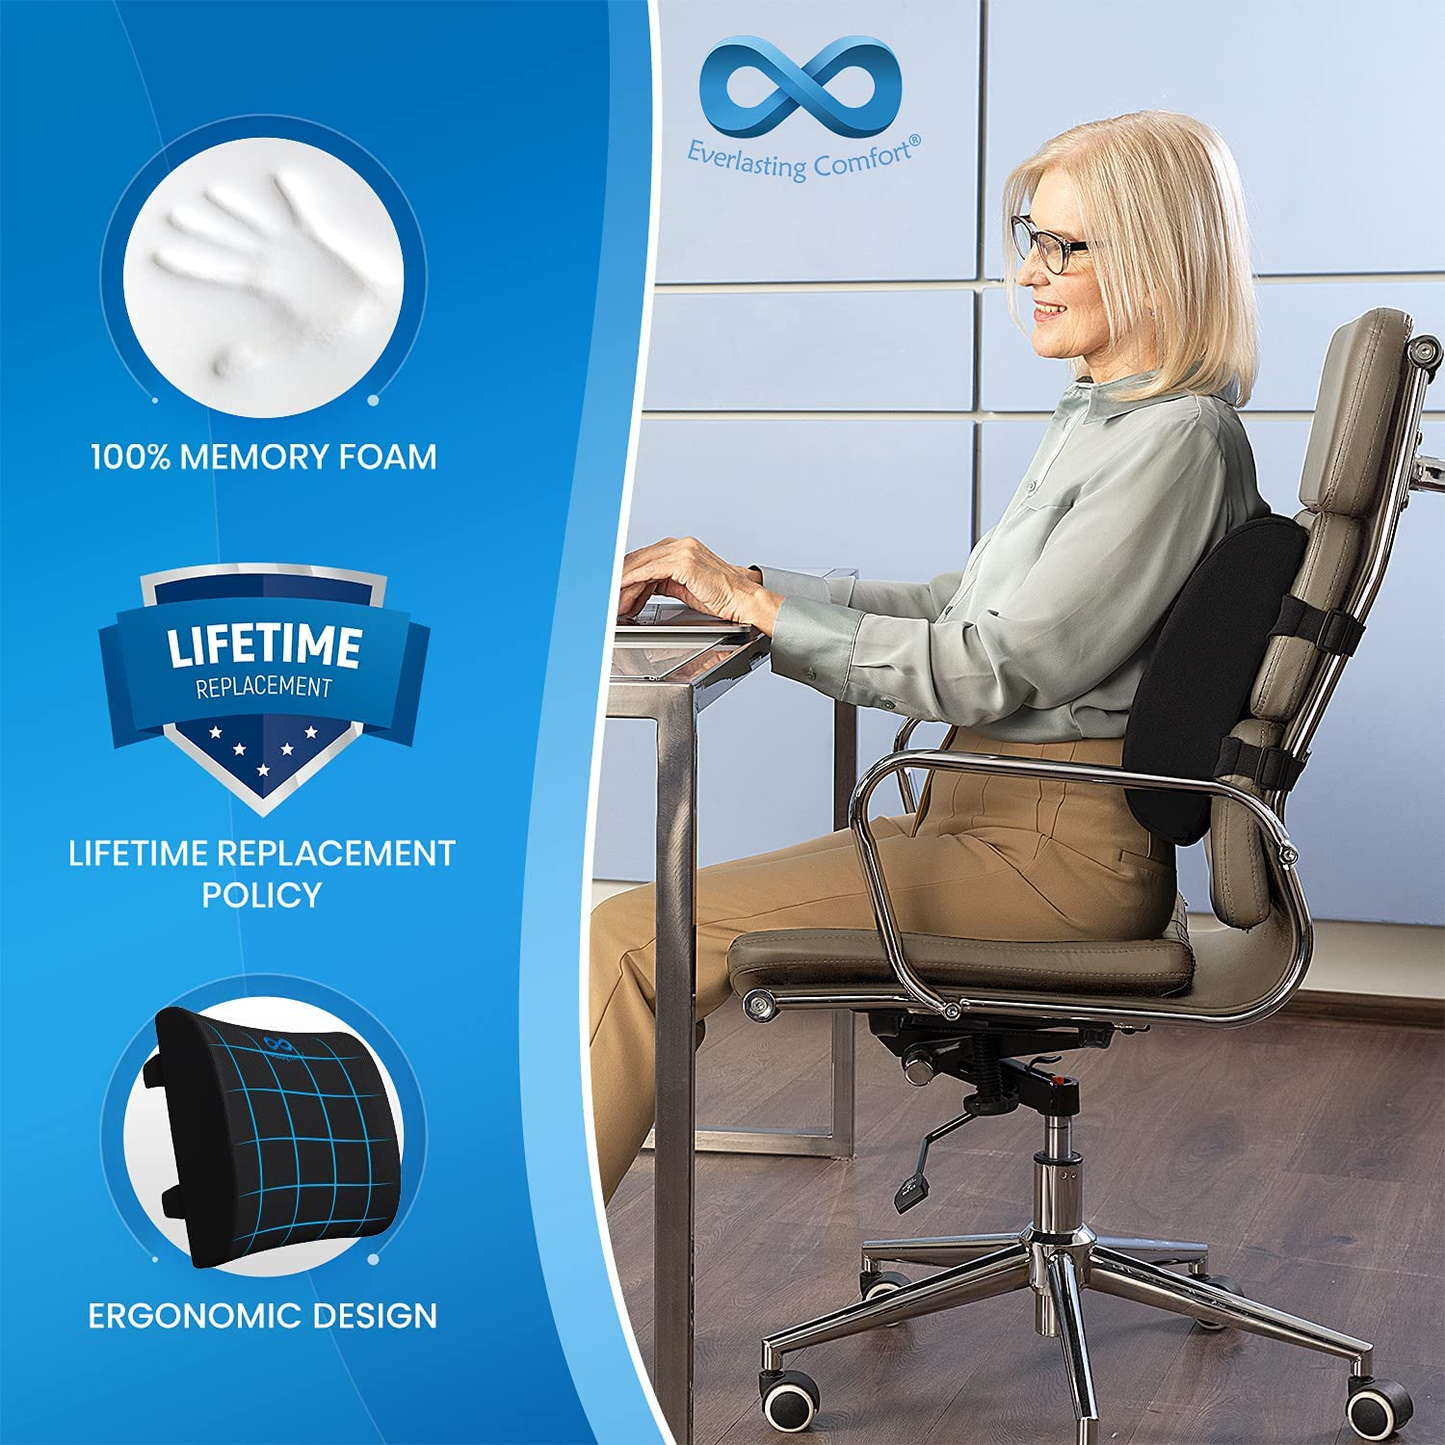  Lumbar Support Pillow for Office Chair Back - Improve Posture While Sitting - Memory Foam Cushion Design for Computer Desk, Car, Gaming, Couch, Recliner